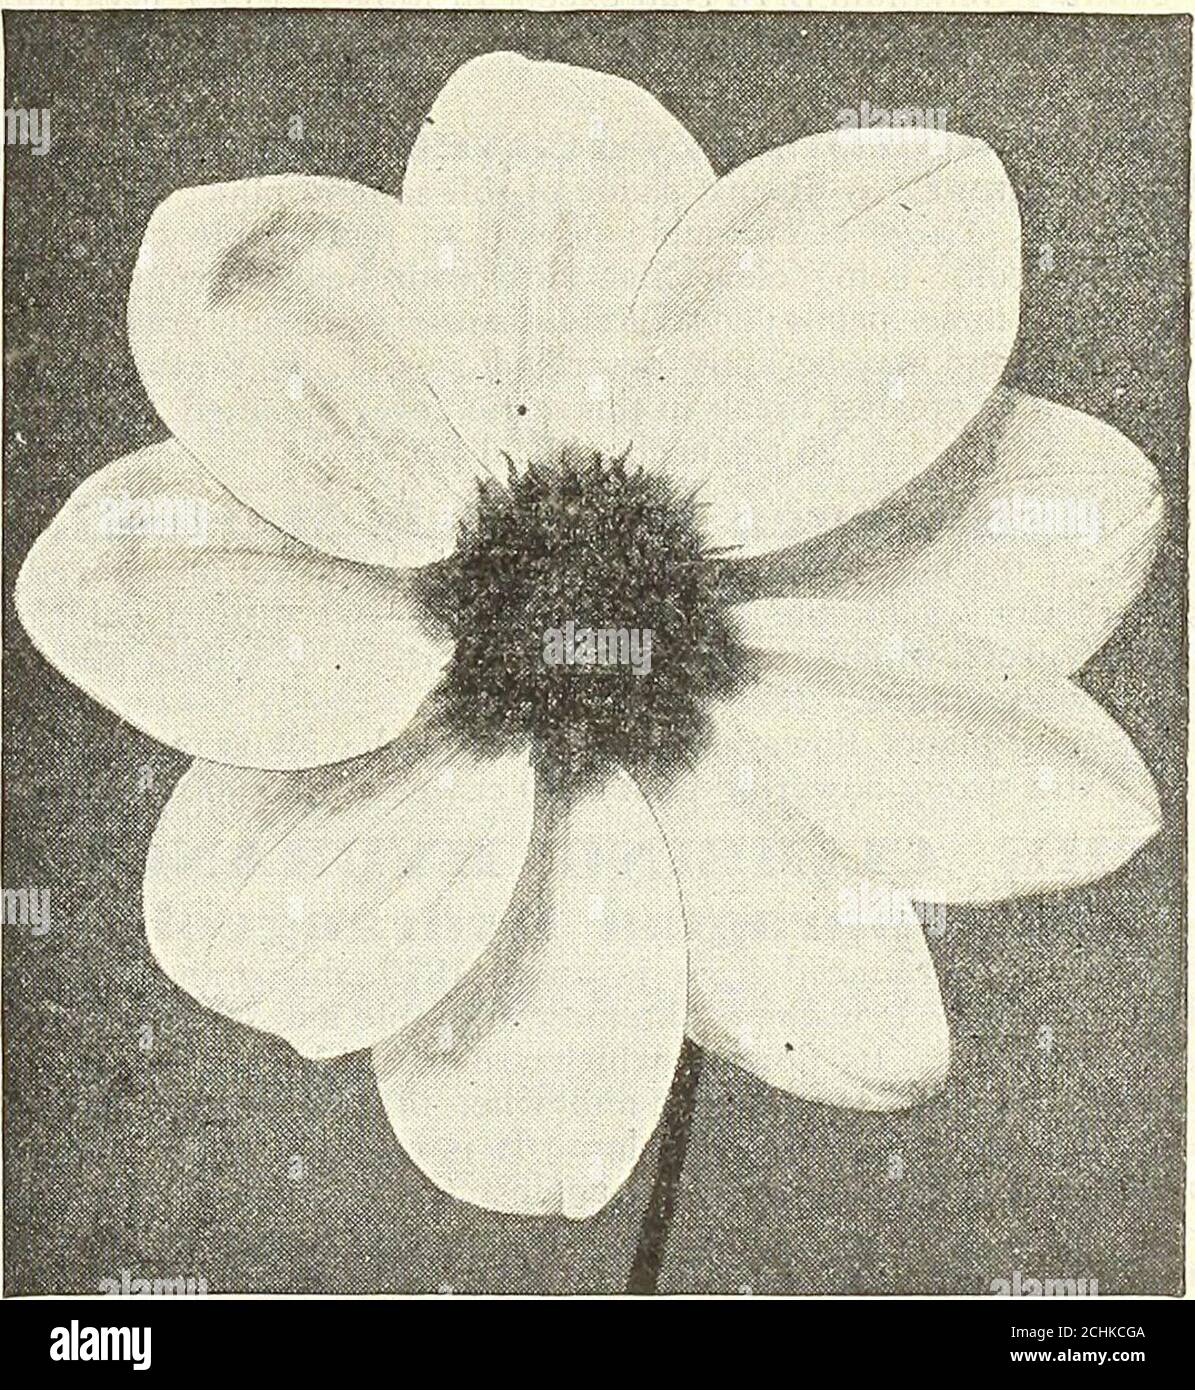 . Dreer's garden 1902 calendar . regularly built flower, and on account of thisunique form is well natned, the word Arachne meaningspider. The petals are creamy white, edged with a broadband of crimson. The coloring, however, varies as much asthe form, there rarely being two flowers alike. 50 cts. each. Britannia. Deep shaded salmon flesh, free and early, stoutstiff sten.s. Capstan. Soft brick-red shaded apricot, remarkable for itstree and early flowering. Dankward. Dark rose shading to a luminous carmine cen-tre, of perfect lorm. 50 cis. each. Exquisite. Pure orange-scarlet with salmon shadin Stock Photo